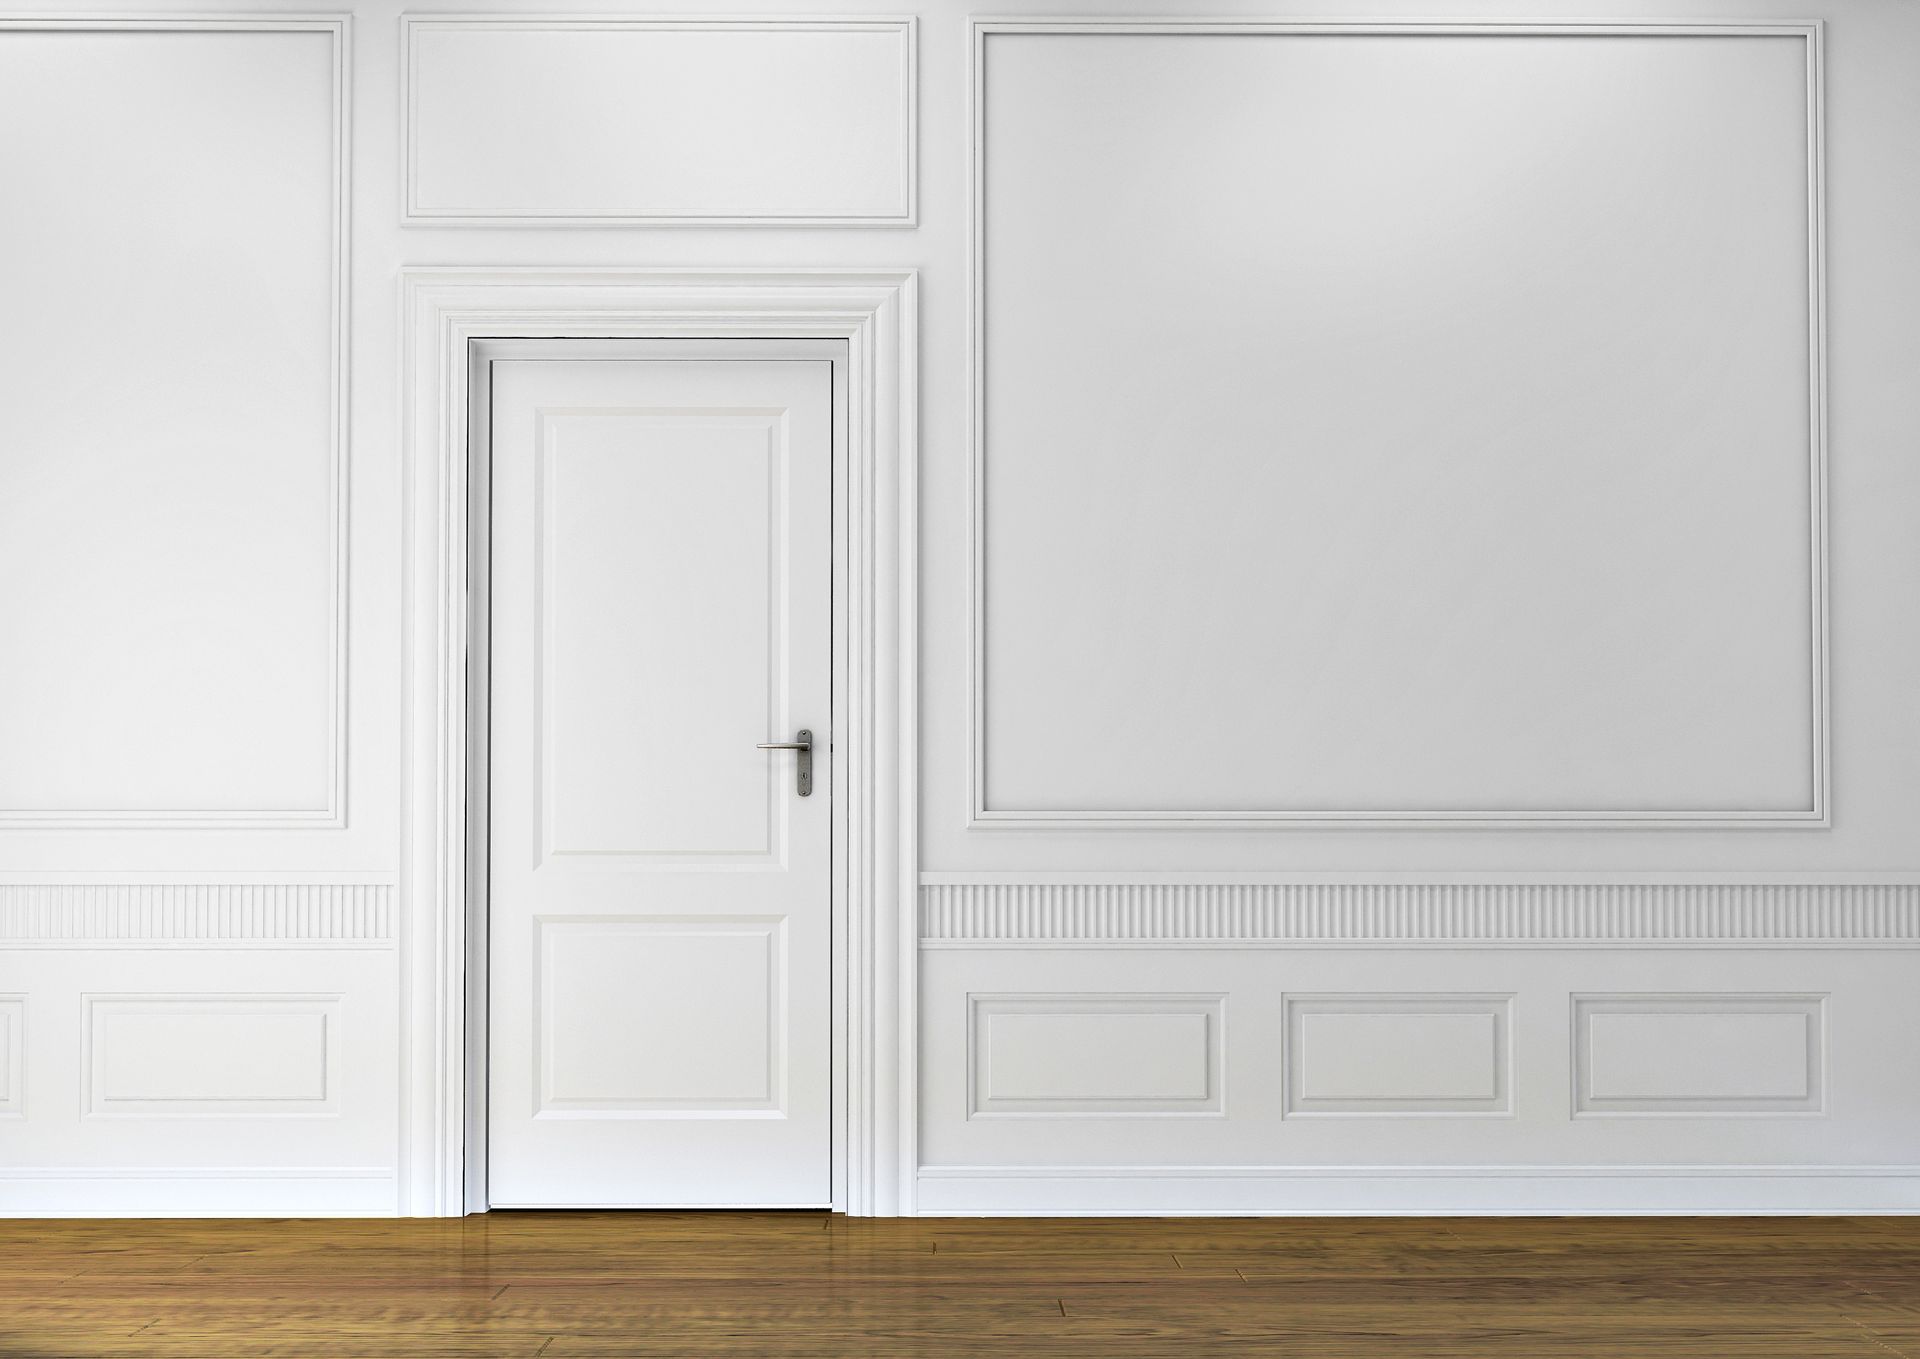 an empty room with white walls and wooden floors and a white door .